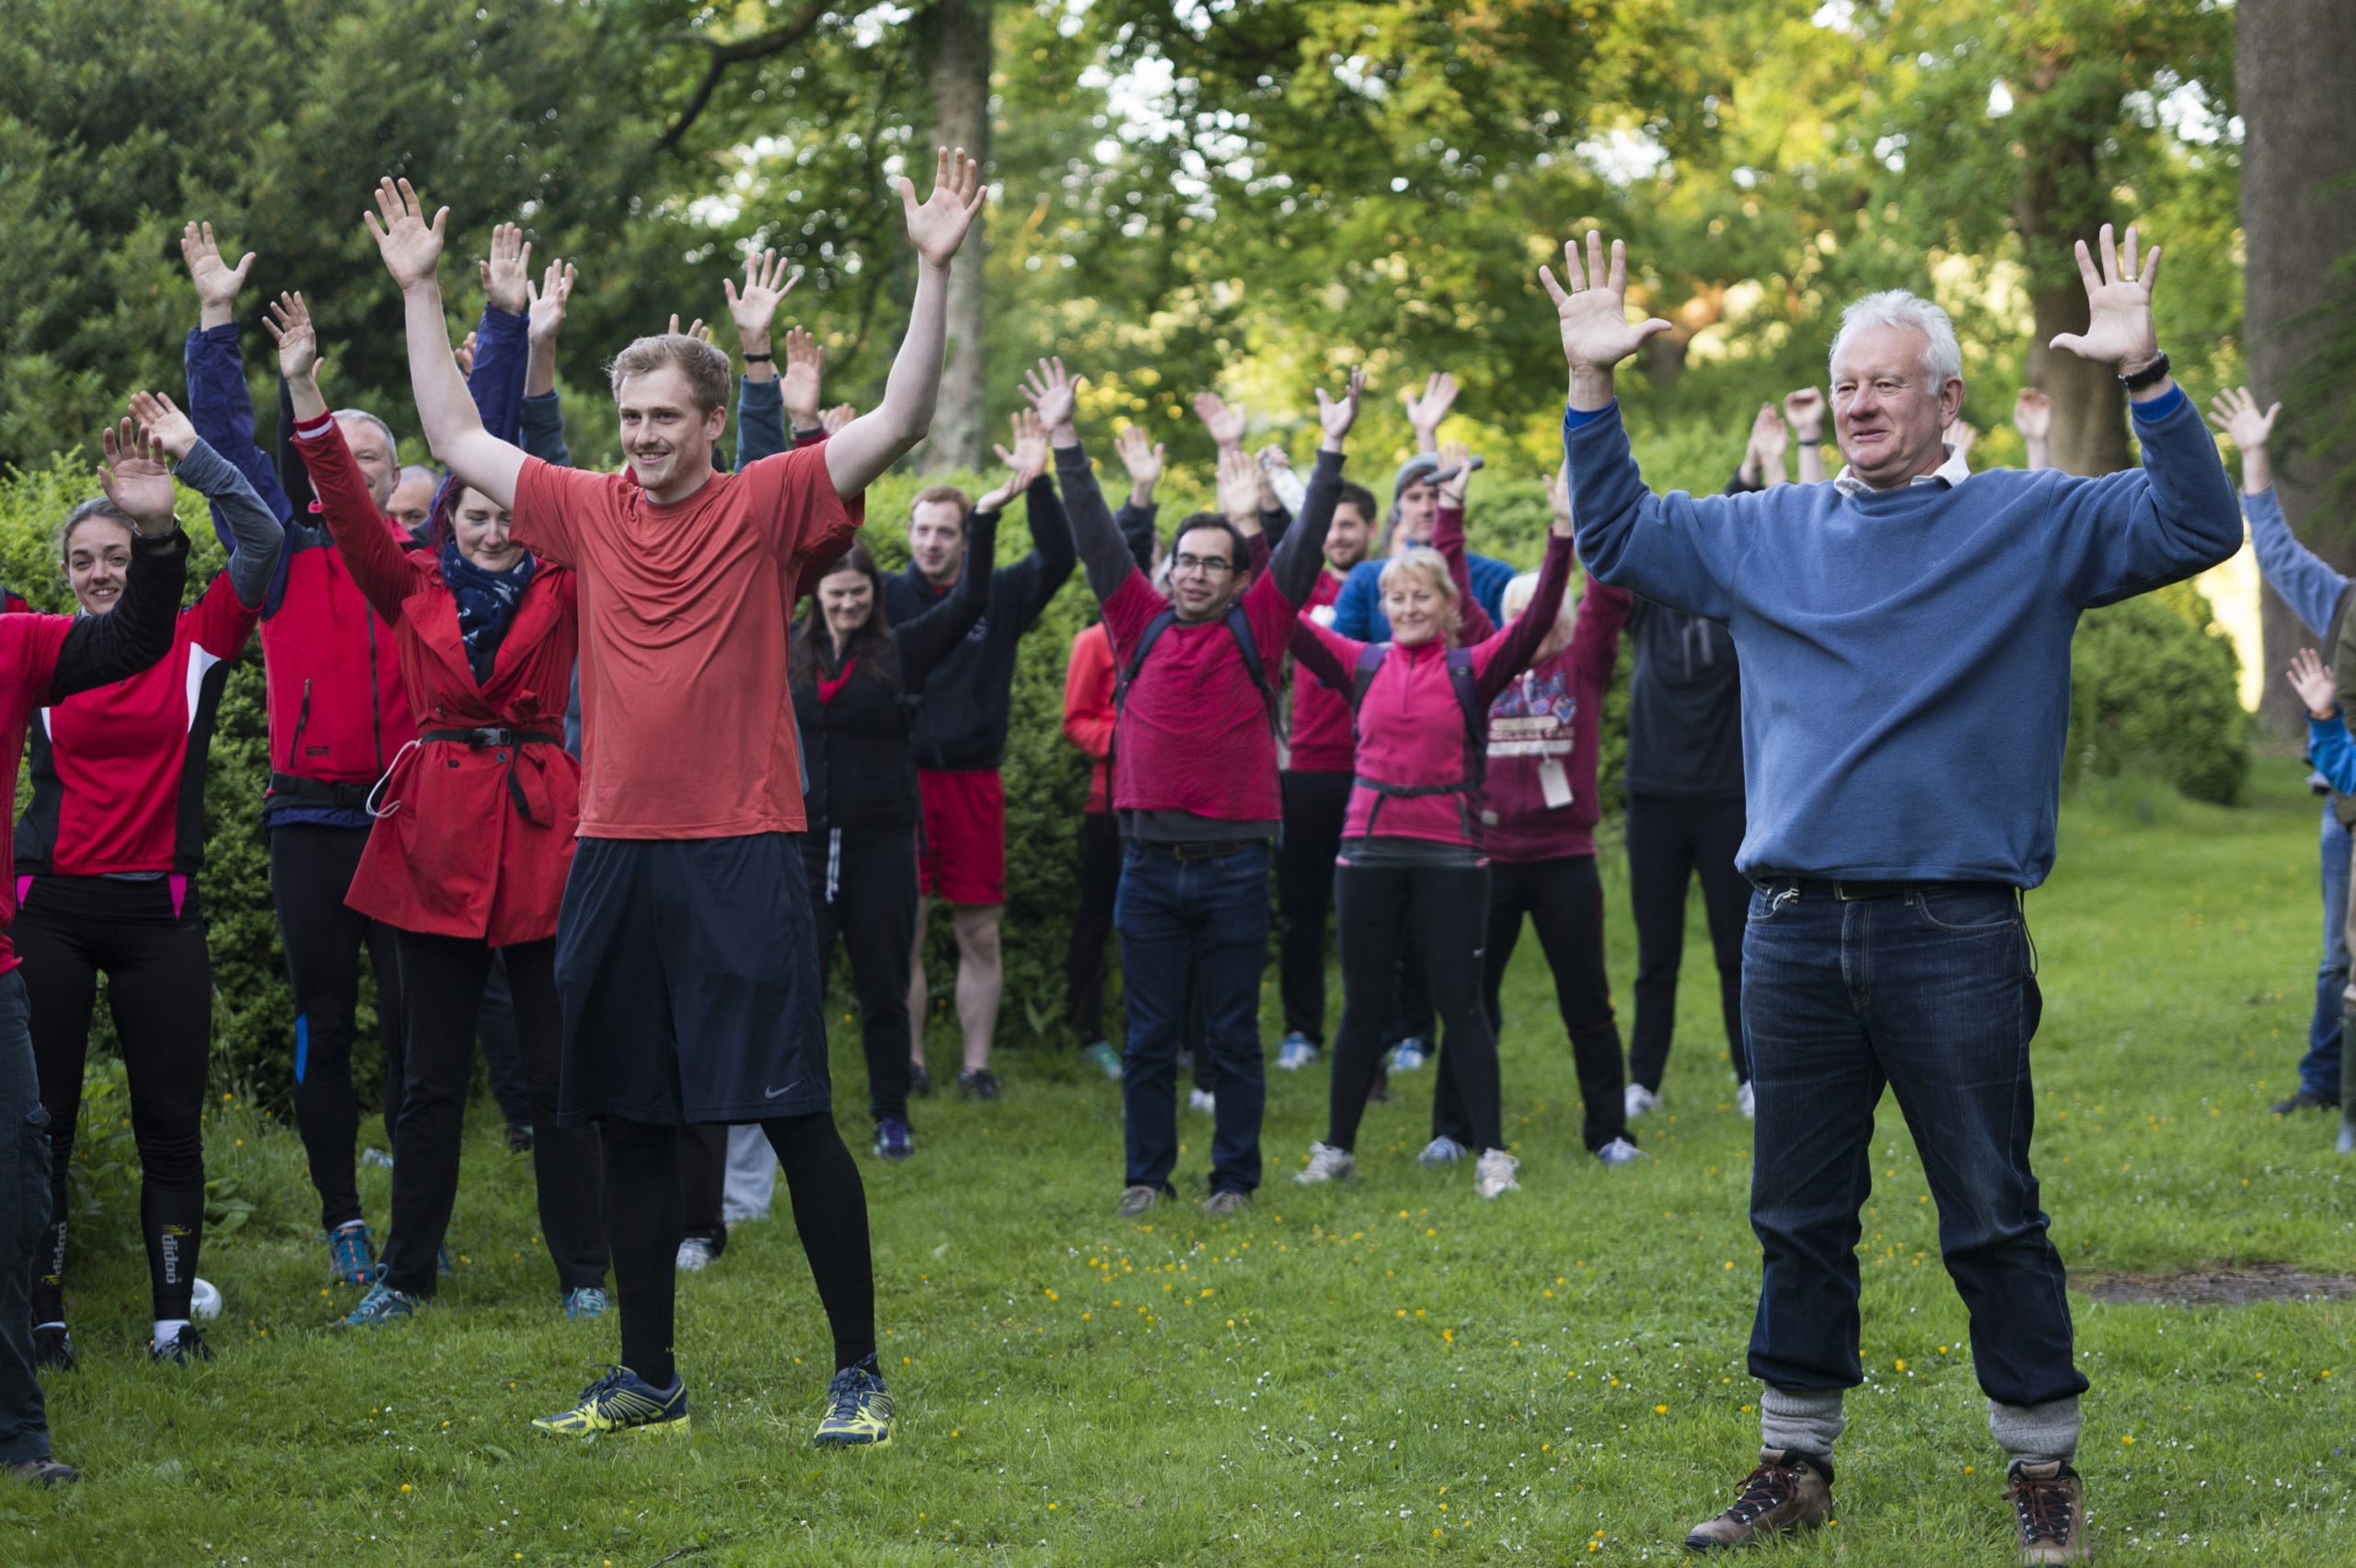 Audience members dressed in red running gear, apart from one chap in a blue jumper and jeans, mid stretch during a warm up routine.